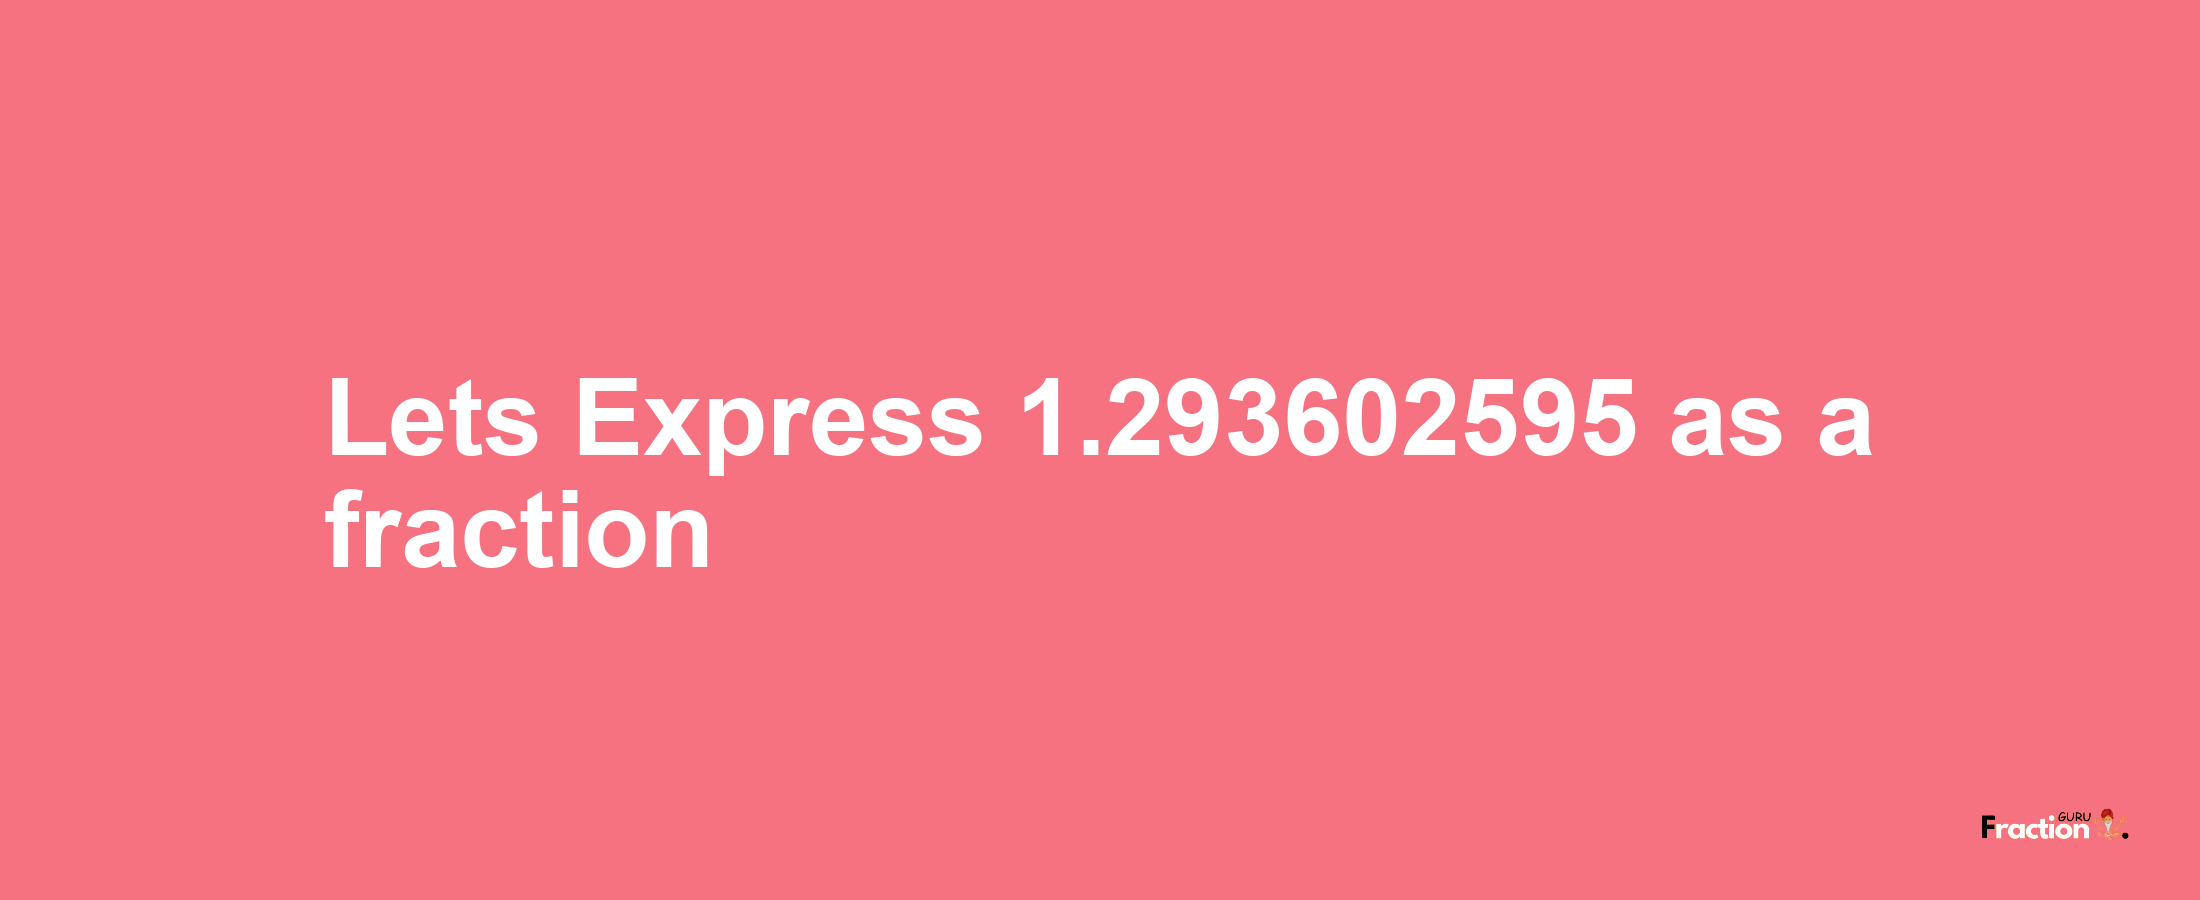 Lets Express 1.293602595 as afraction